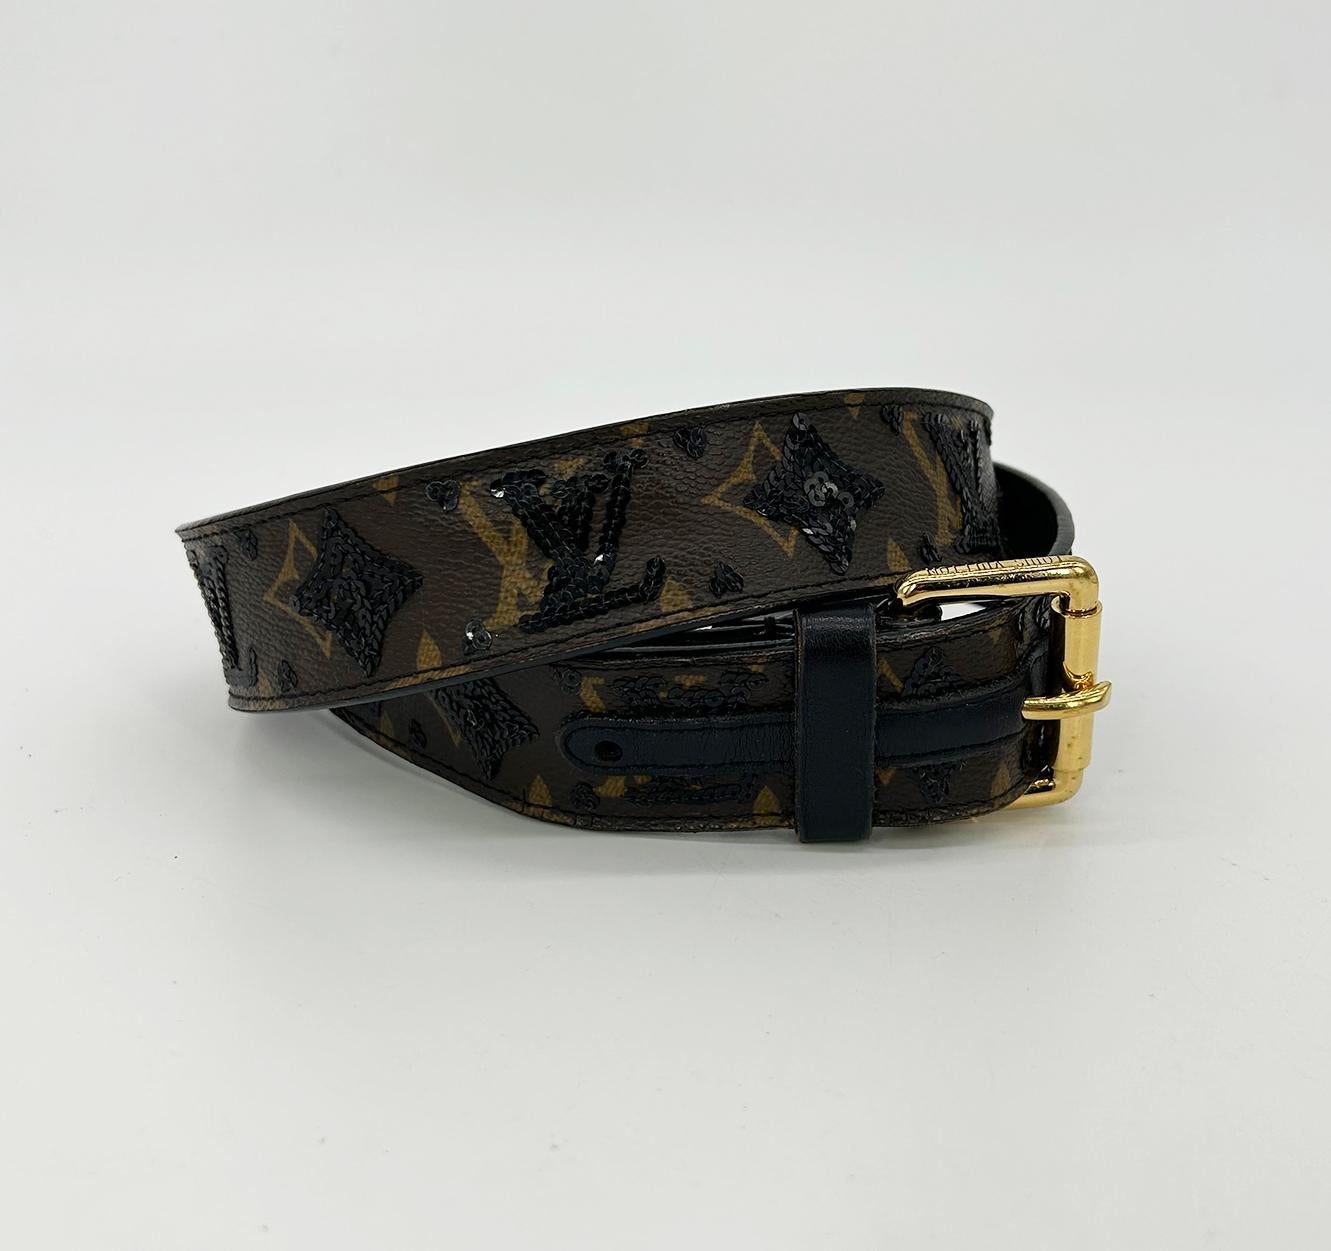 Limited Edition Louis Vuitton Monogram Sequin Eclipse Belt in excellent condition. Signature monogram LV canvas trimmed with black sequins throughout. Golden brass buckle engraved with Louis Vuitton. Black lambskin leather back lining. 90cm size.